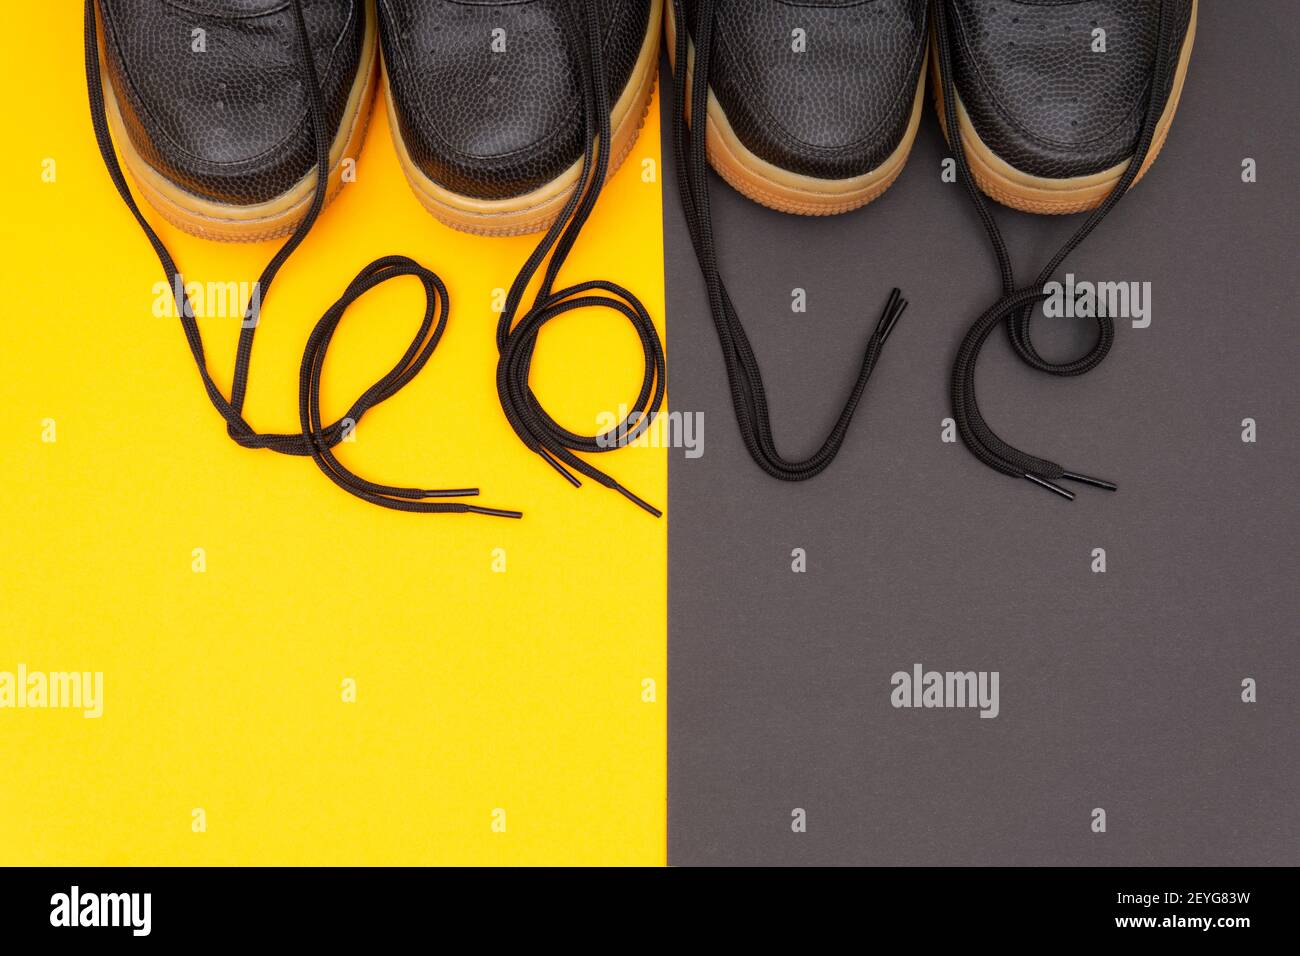 Matching leather sneakers with the lettering LOVE made of the laces on a contrast yellow and brown background. Romantic concept of wearing matching ou Stock Photo